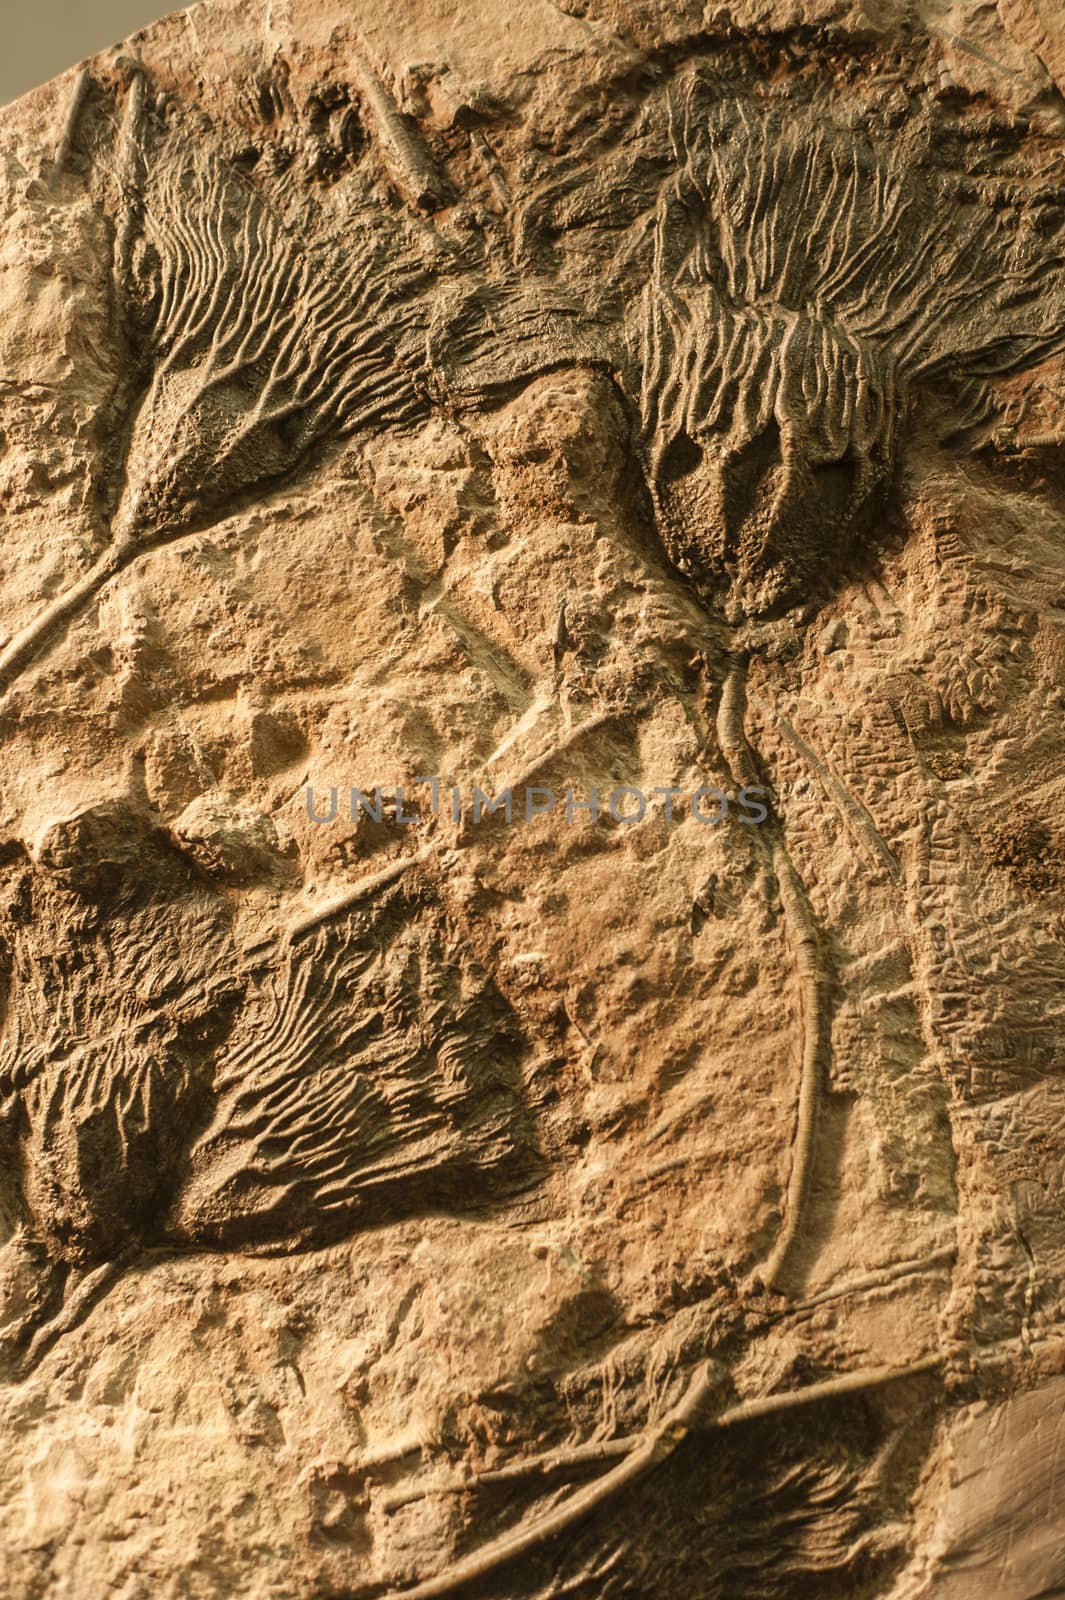 Section of ancient rock with fossilized sea crinoids.